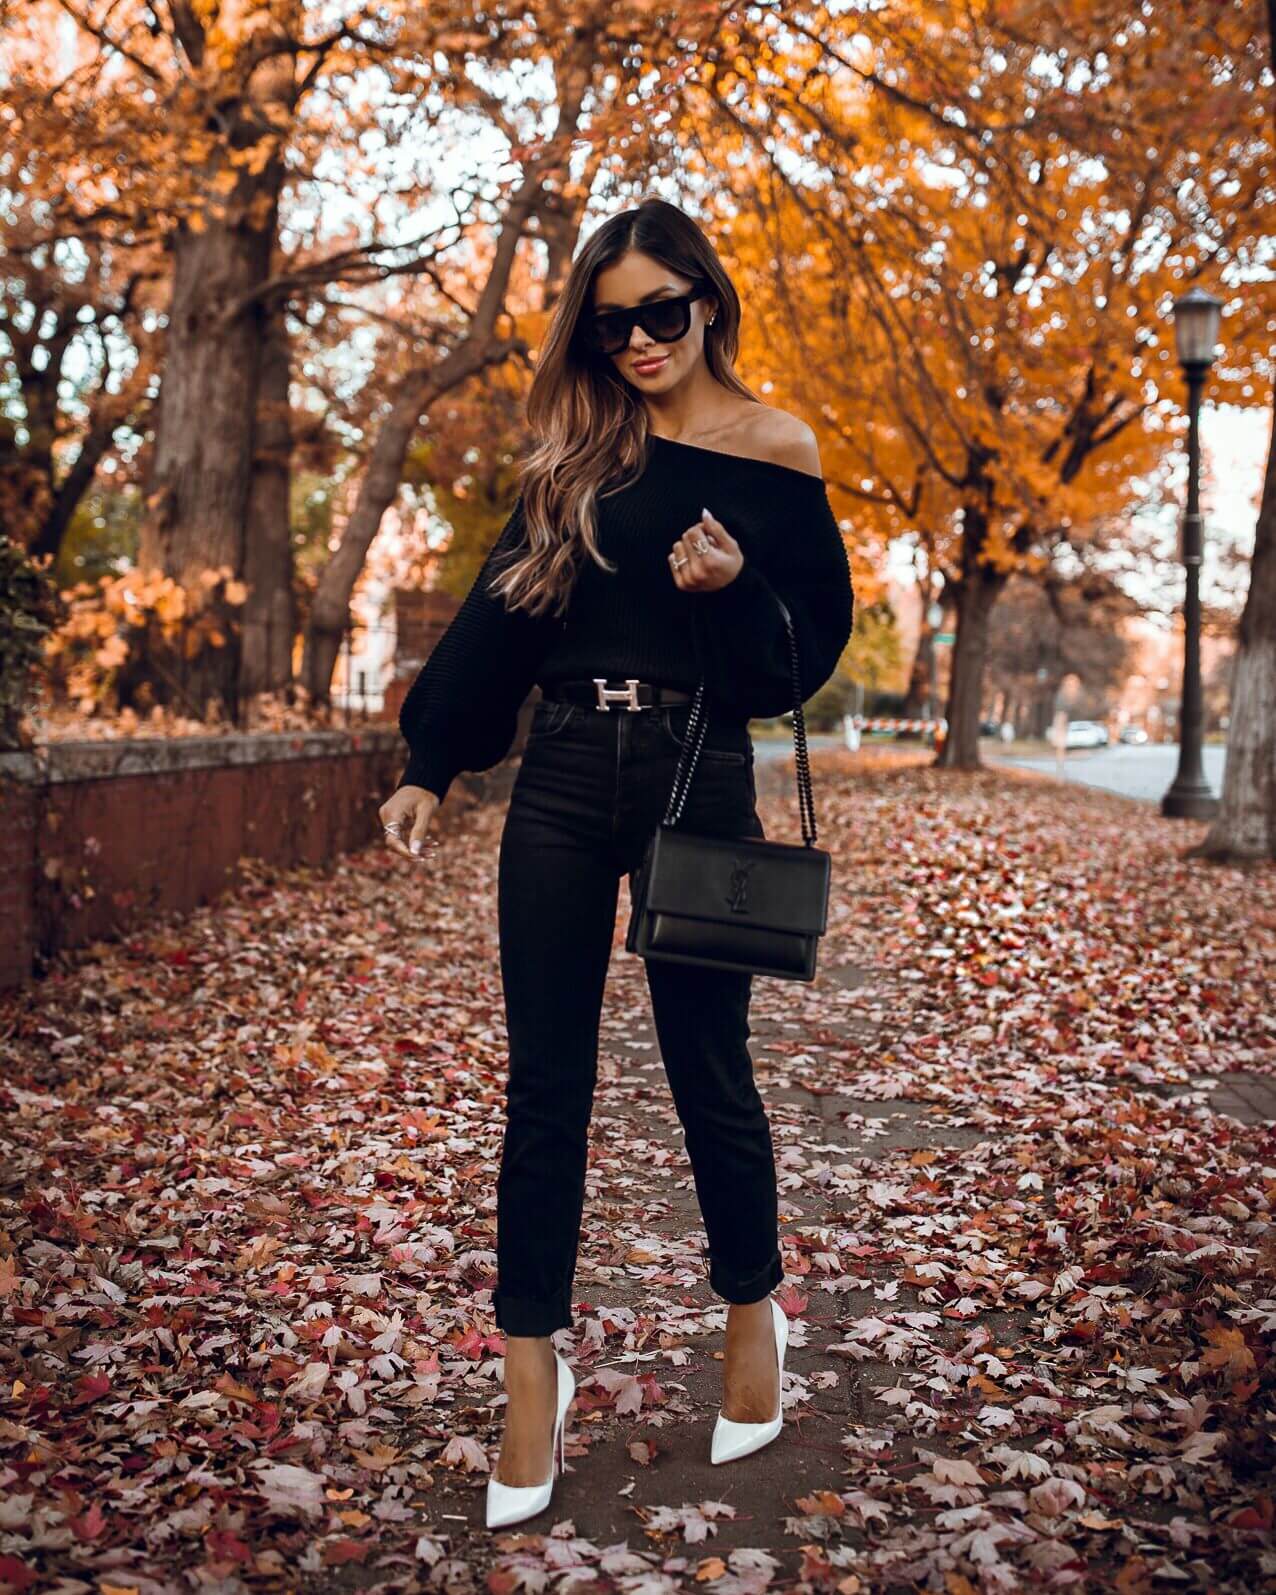 fashion blogger mia mia mine wearing a black outfit from revolve